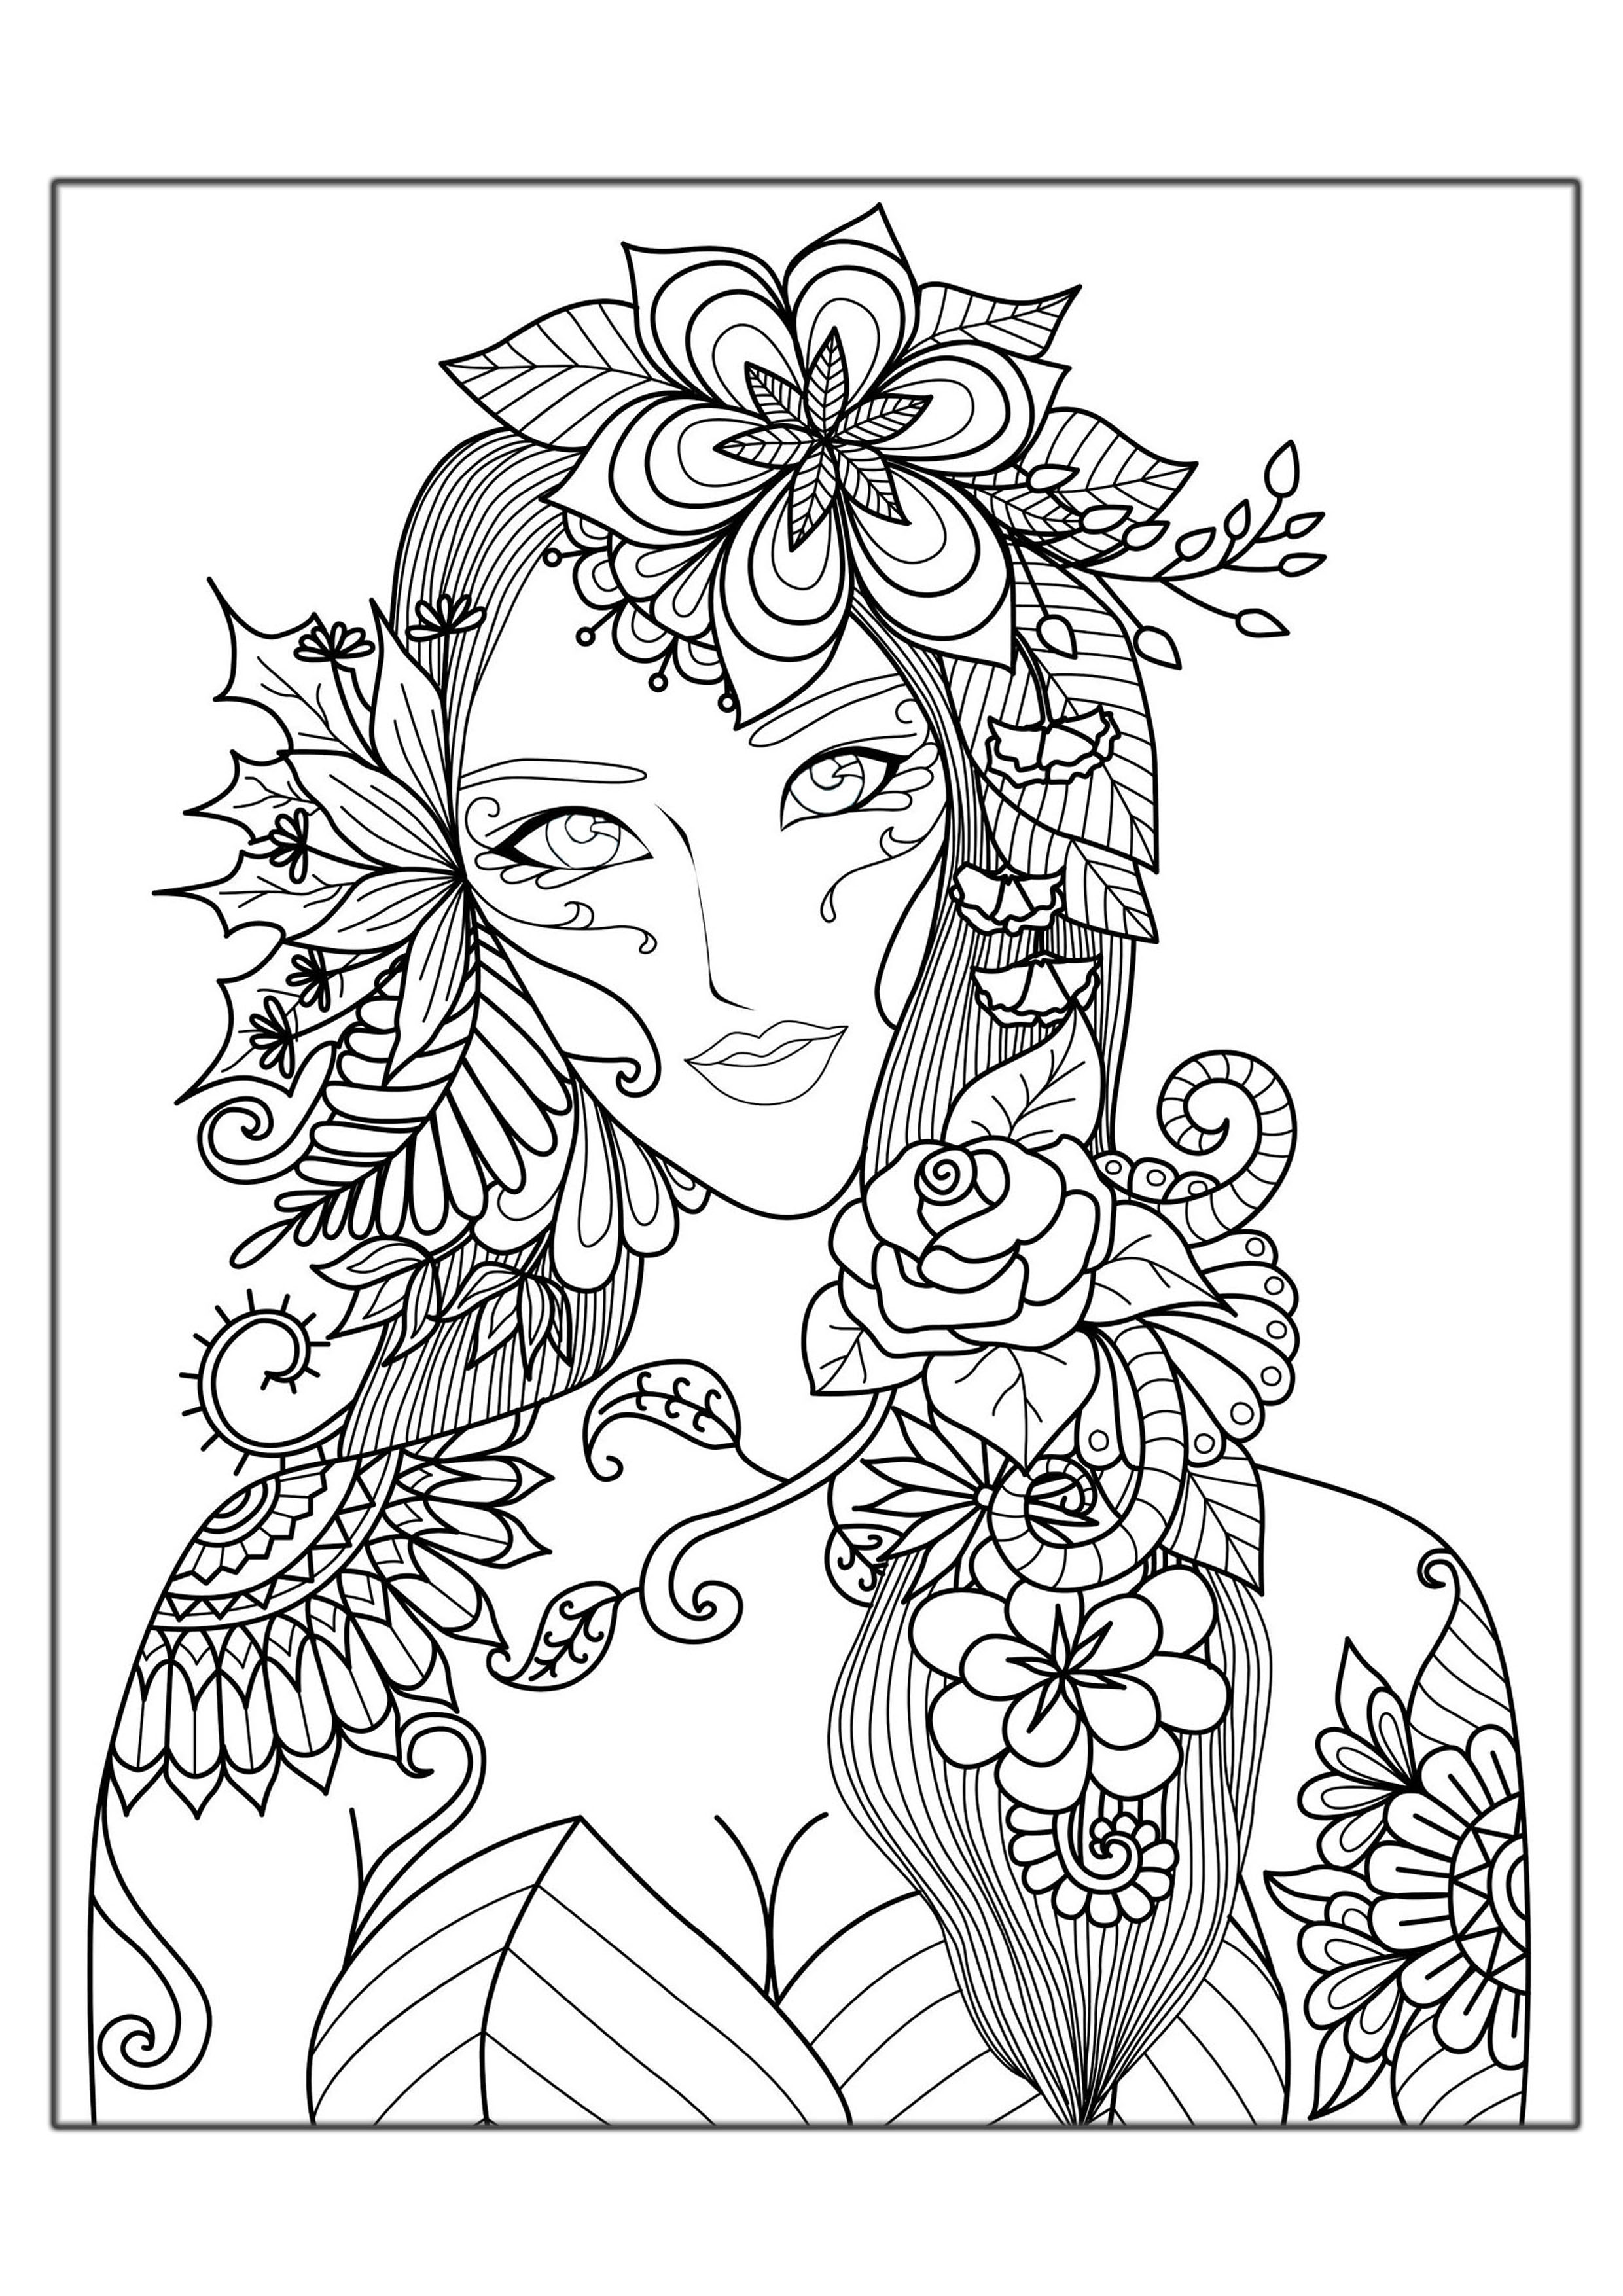 Download Hard Coloring Pages For Adults Best Coloring Pages For Kids